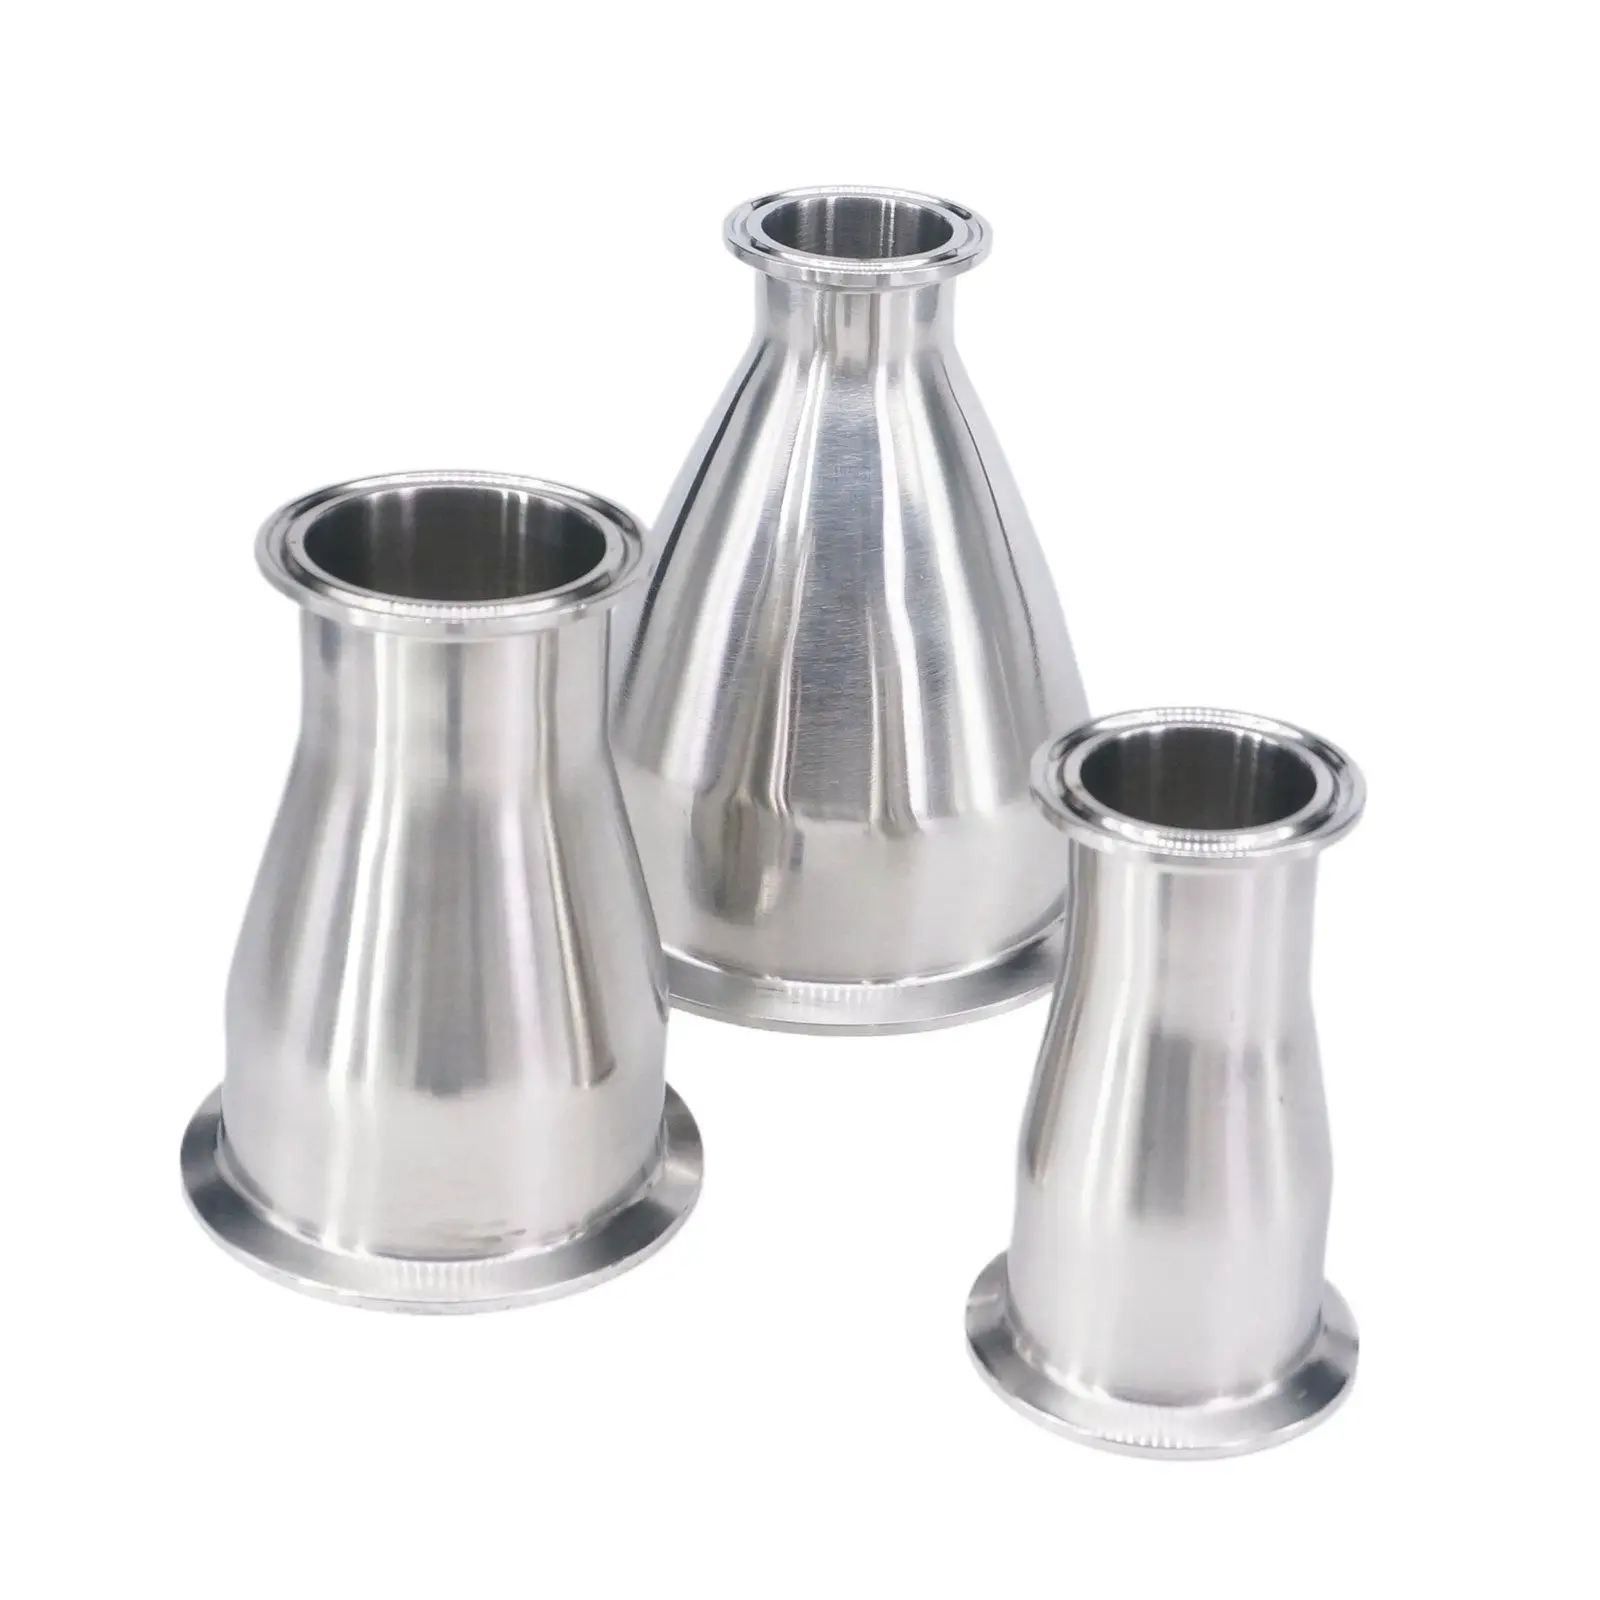 

Tri Clamp 1.5"2" 2.5" 3" 3.5" 4" Fit Tube O/D 45/51/57/63/76/89/102/108/114mm Reducer 304 Stainless Sanitary Fitting